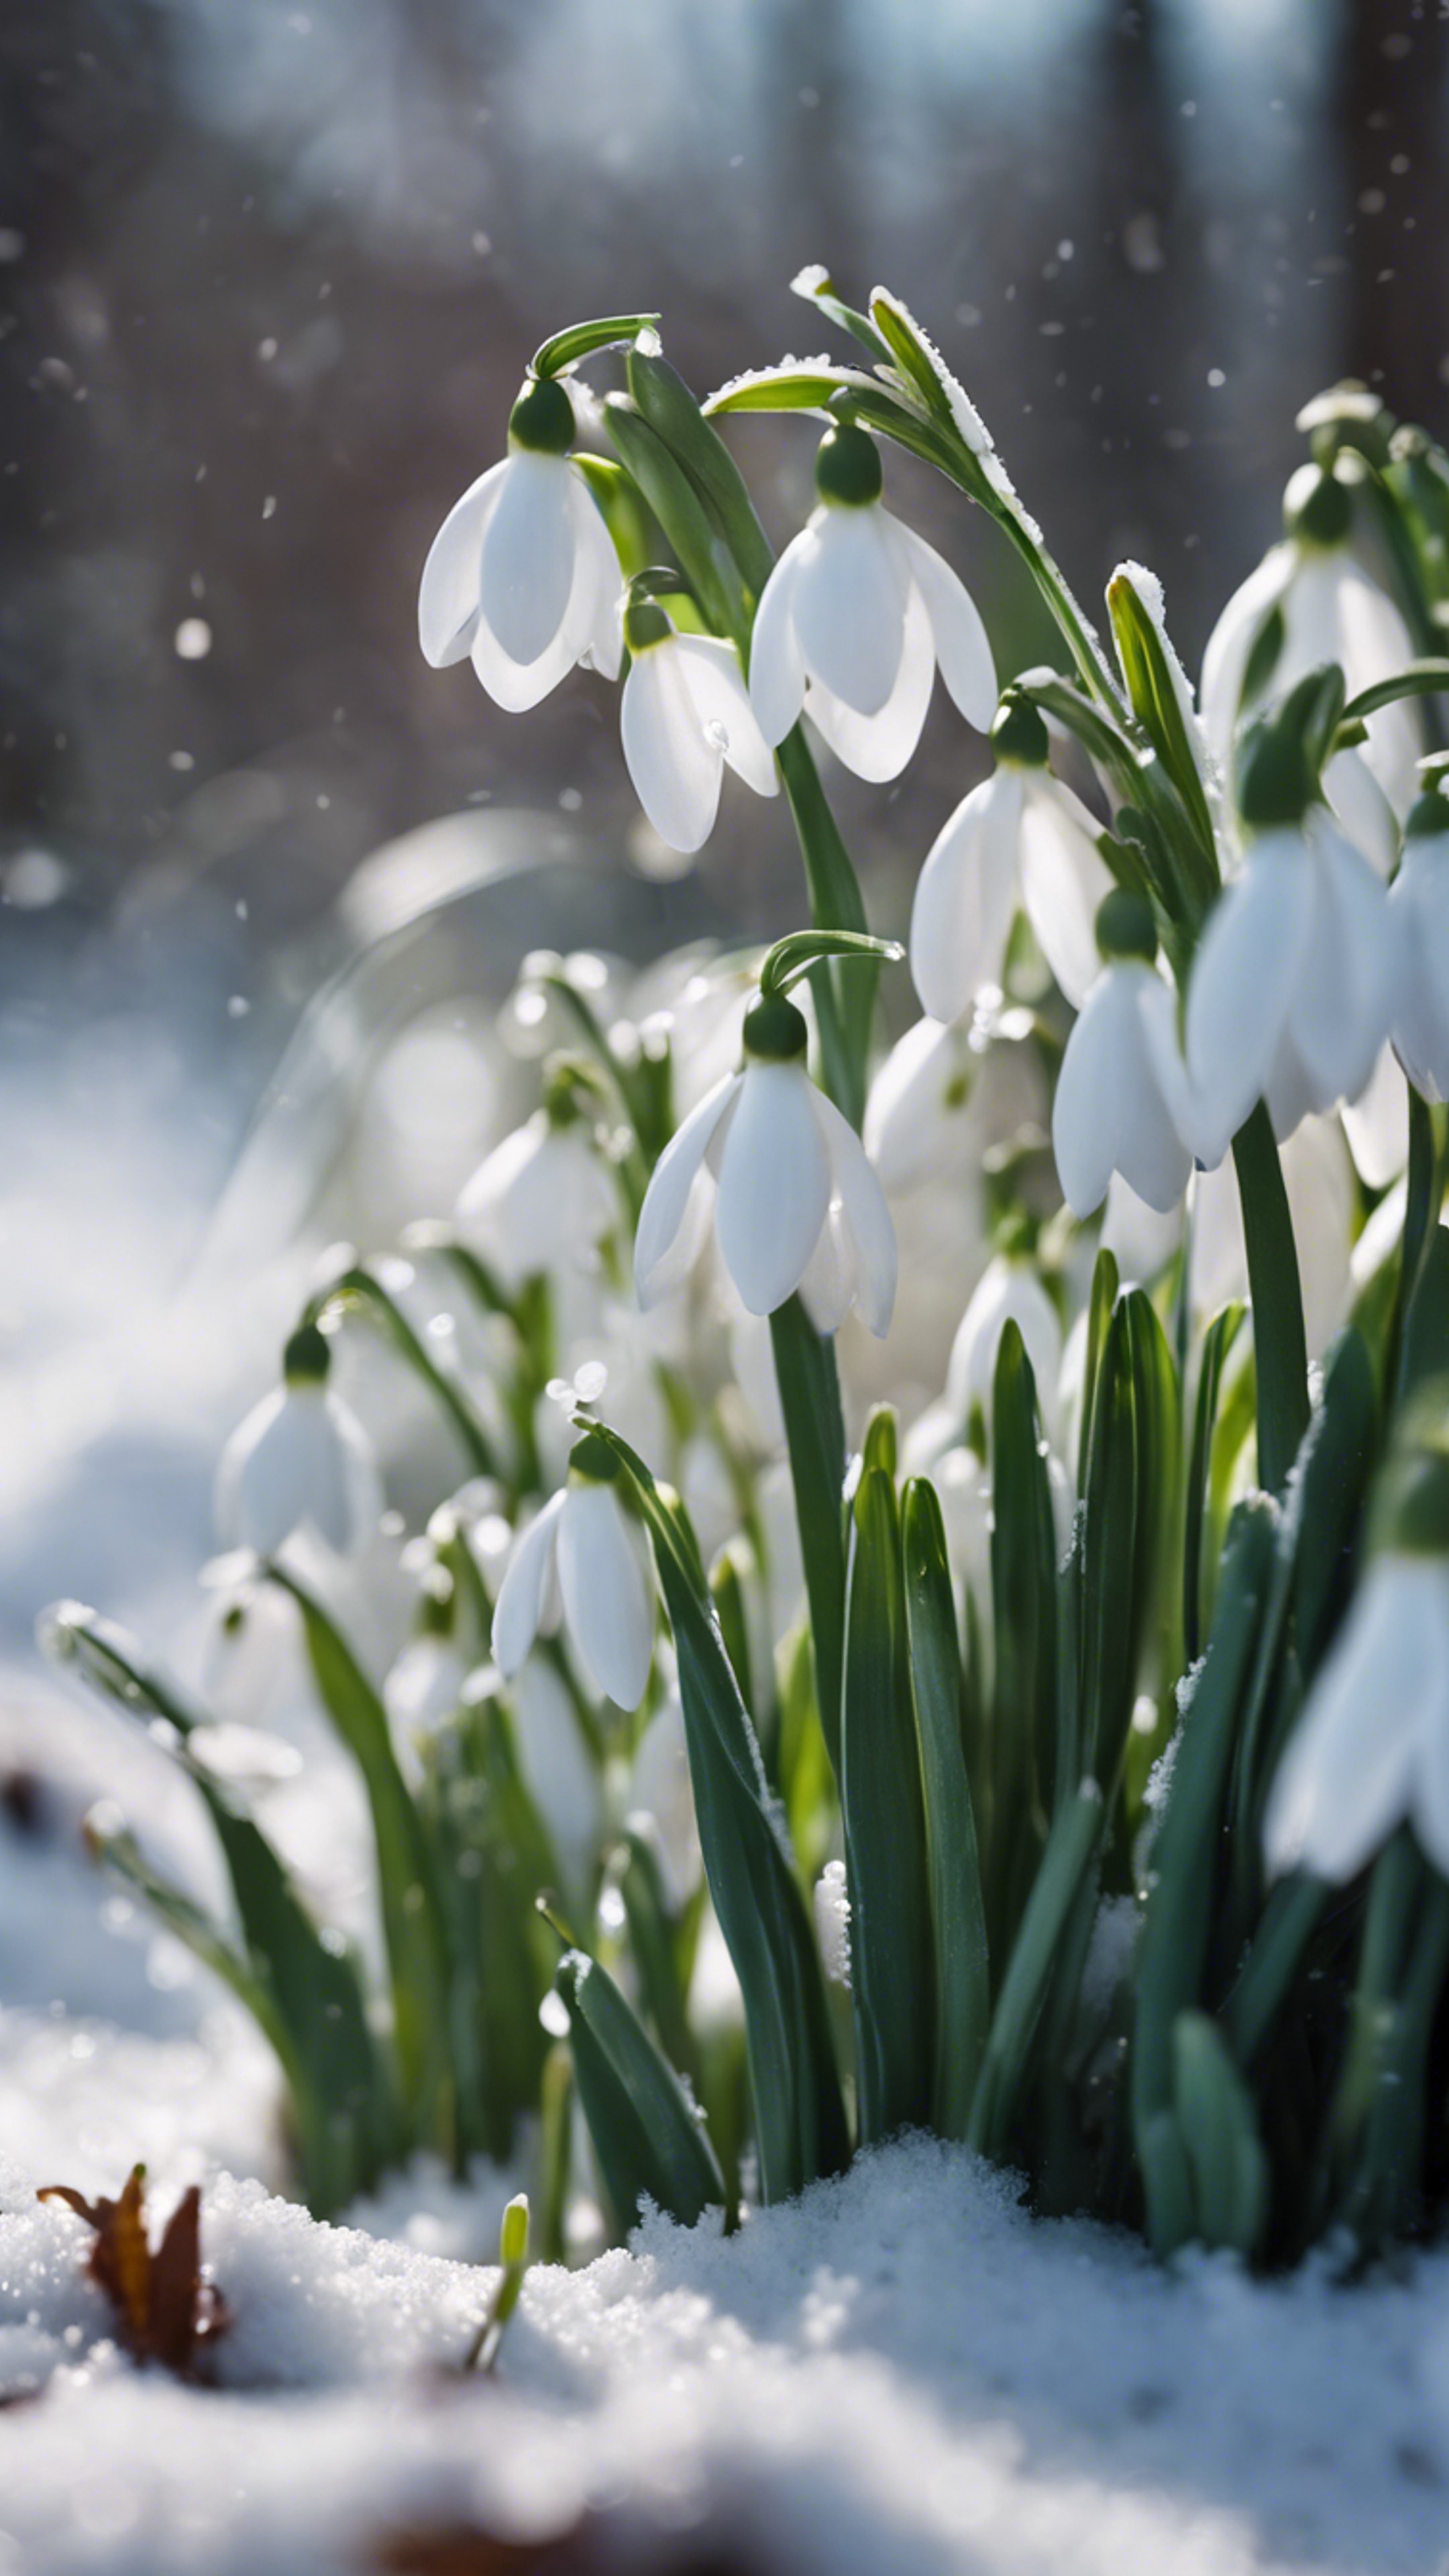 A patch of white snowdrops peeking through a dusting of late spring snow. کاغذ دیواری[e64c535efd0a459c9840]